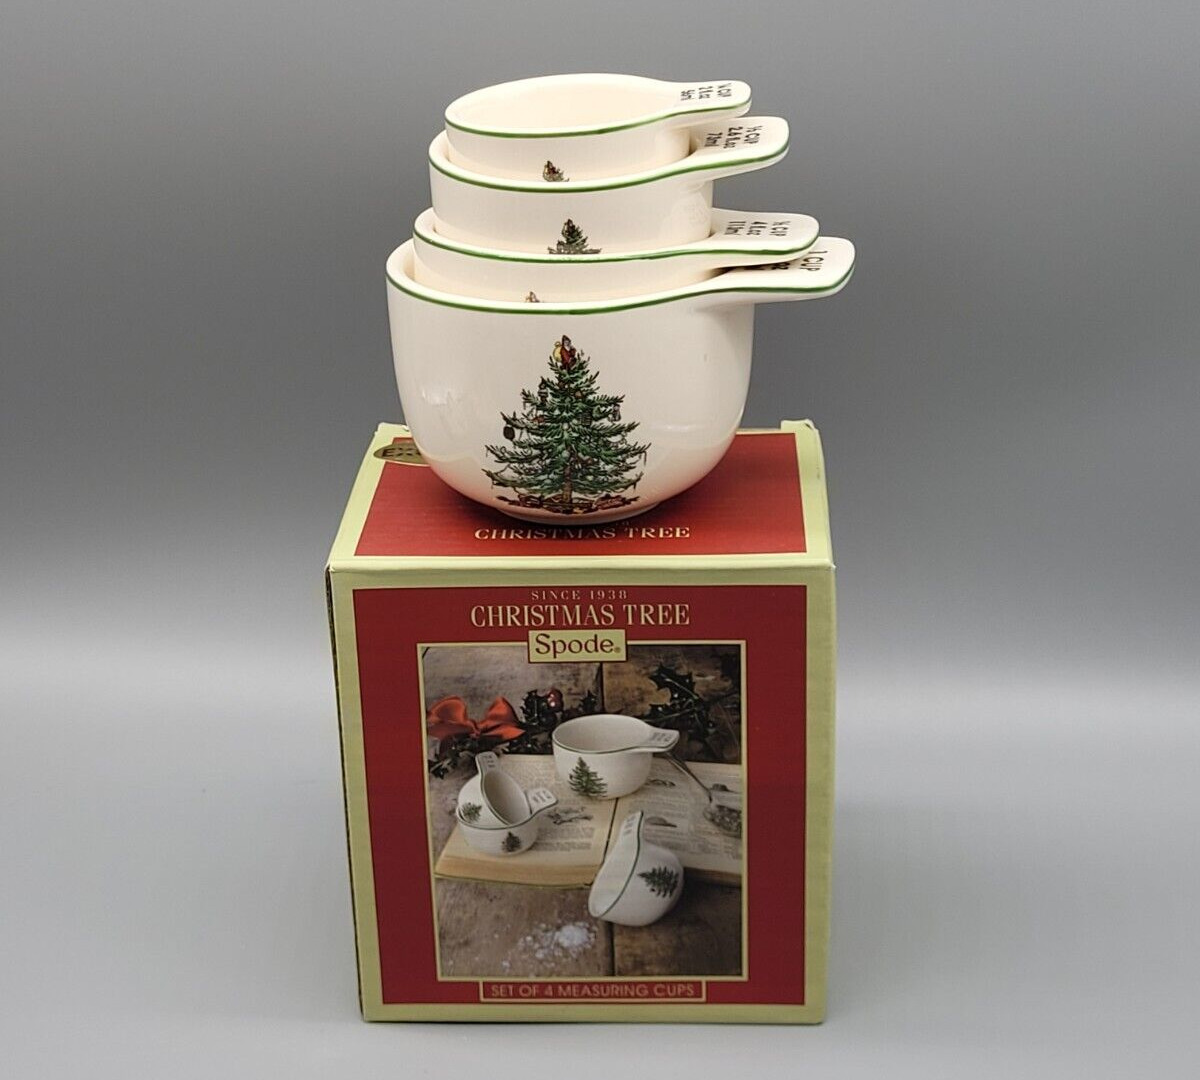 SPODE Christmas Tree (Set of 4) Ceramic MEASURING CUPS In Box